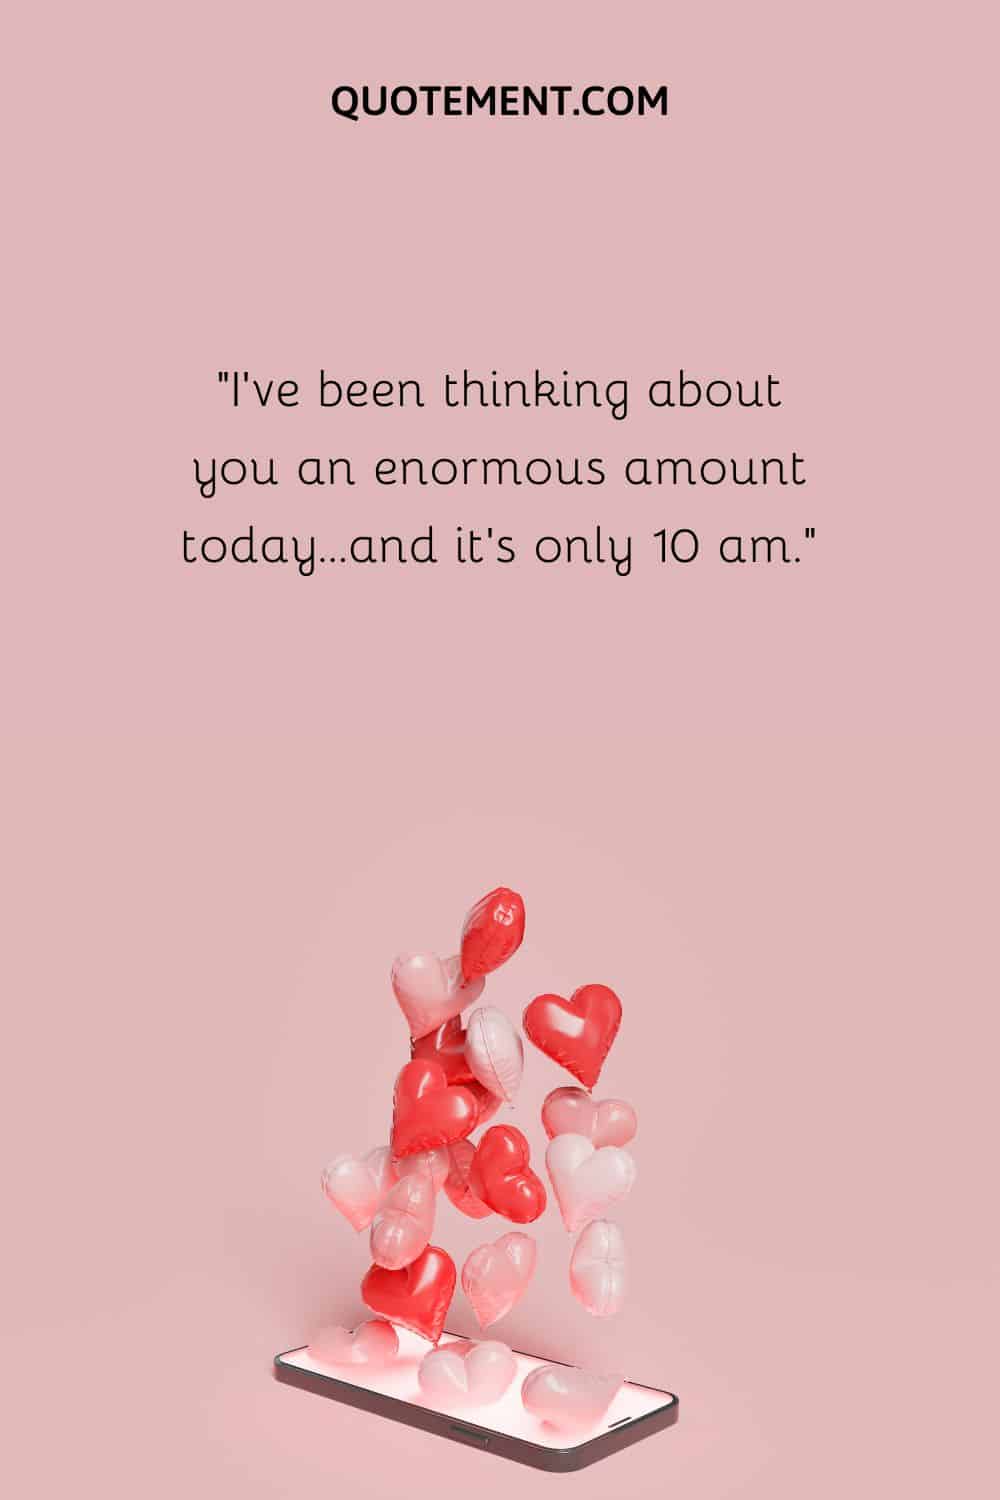 “I’ve been thinking about you an enormous amount today…and it’s only 10 am.”